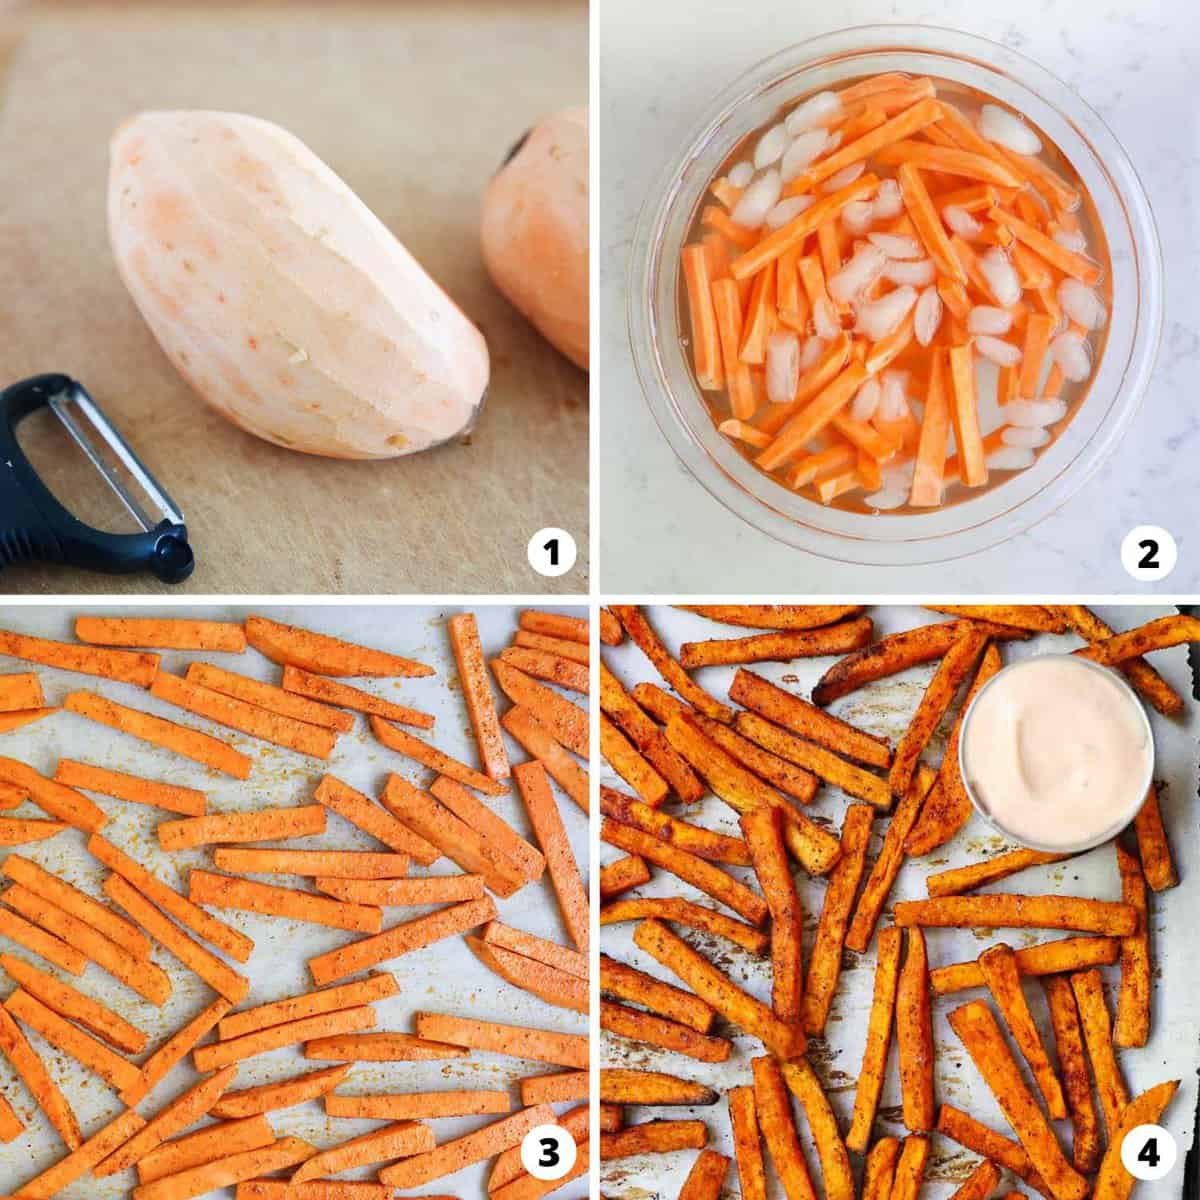 Showing how to make sweet potato fries in a 4 step collage.